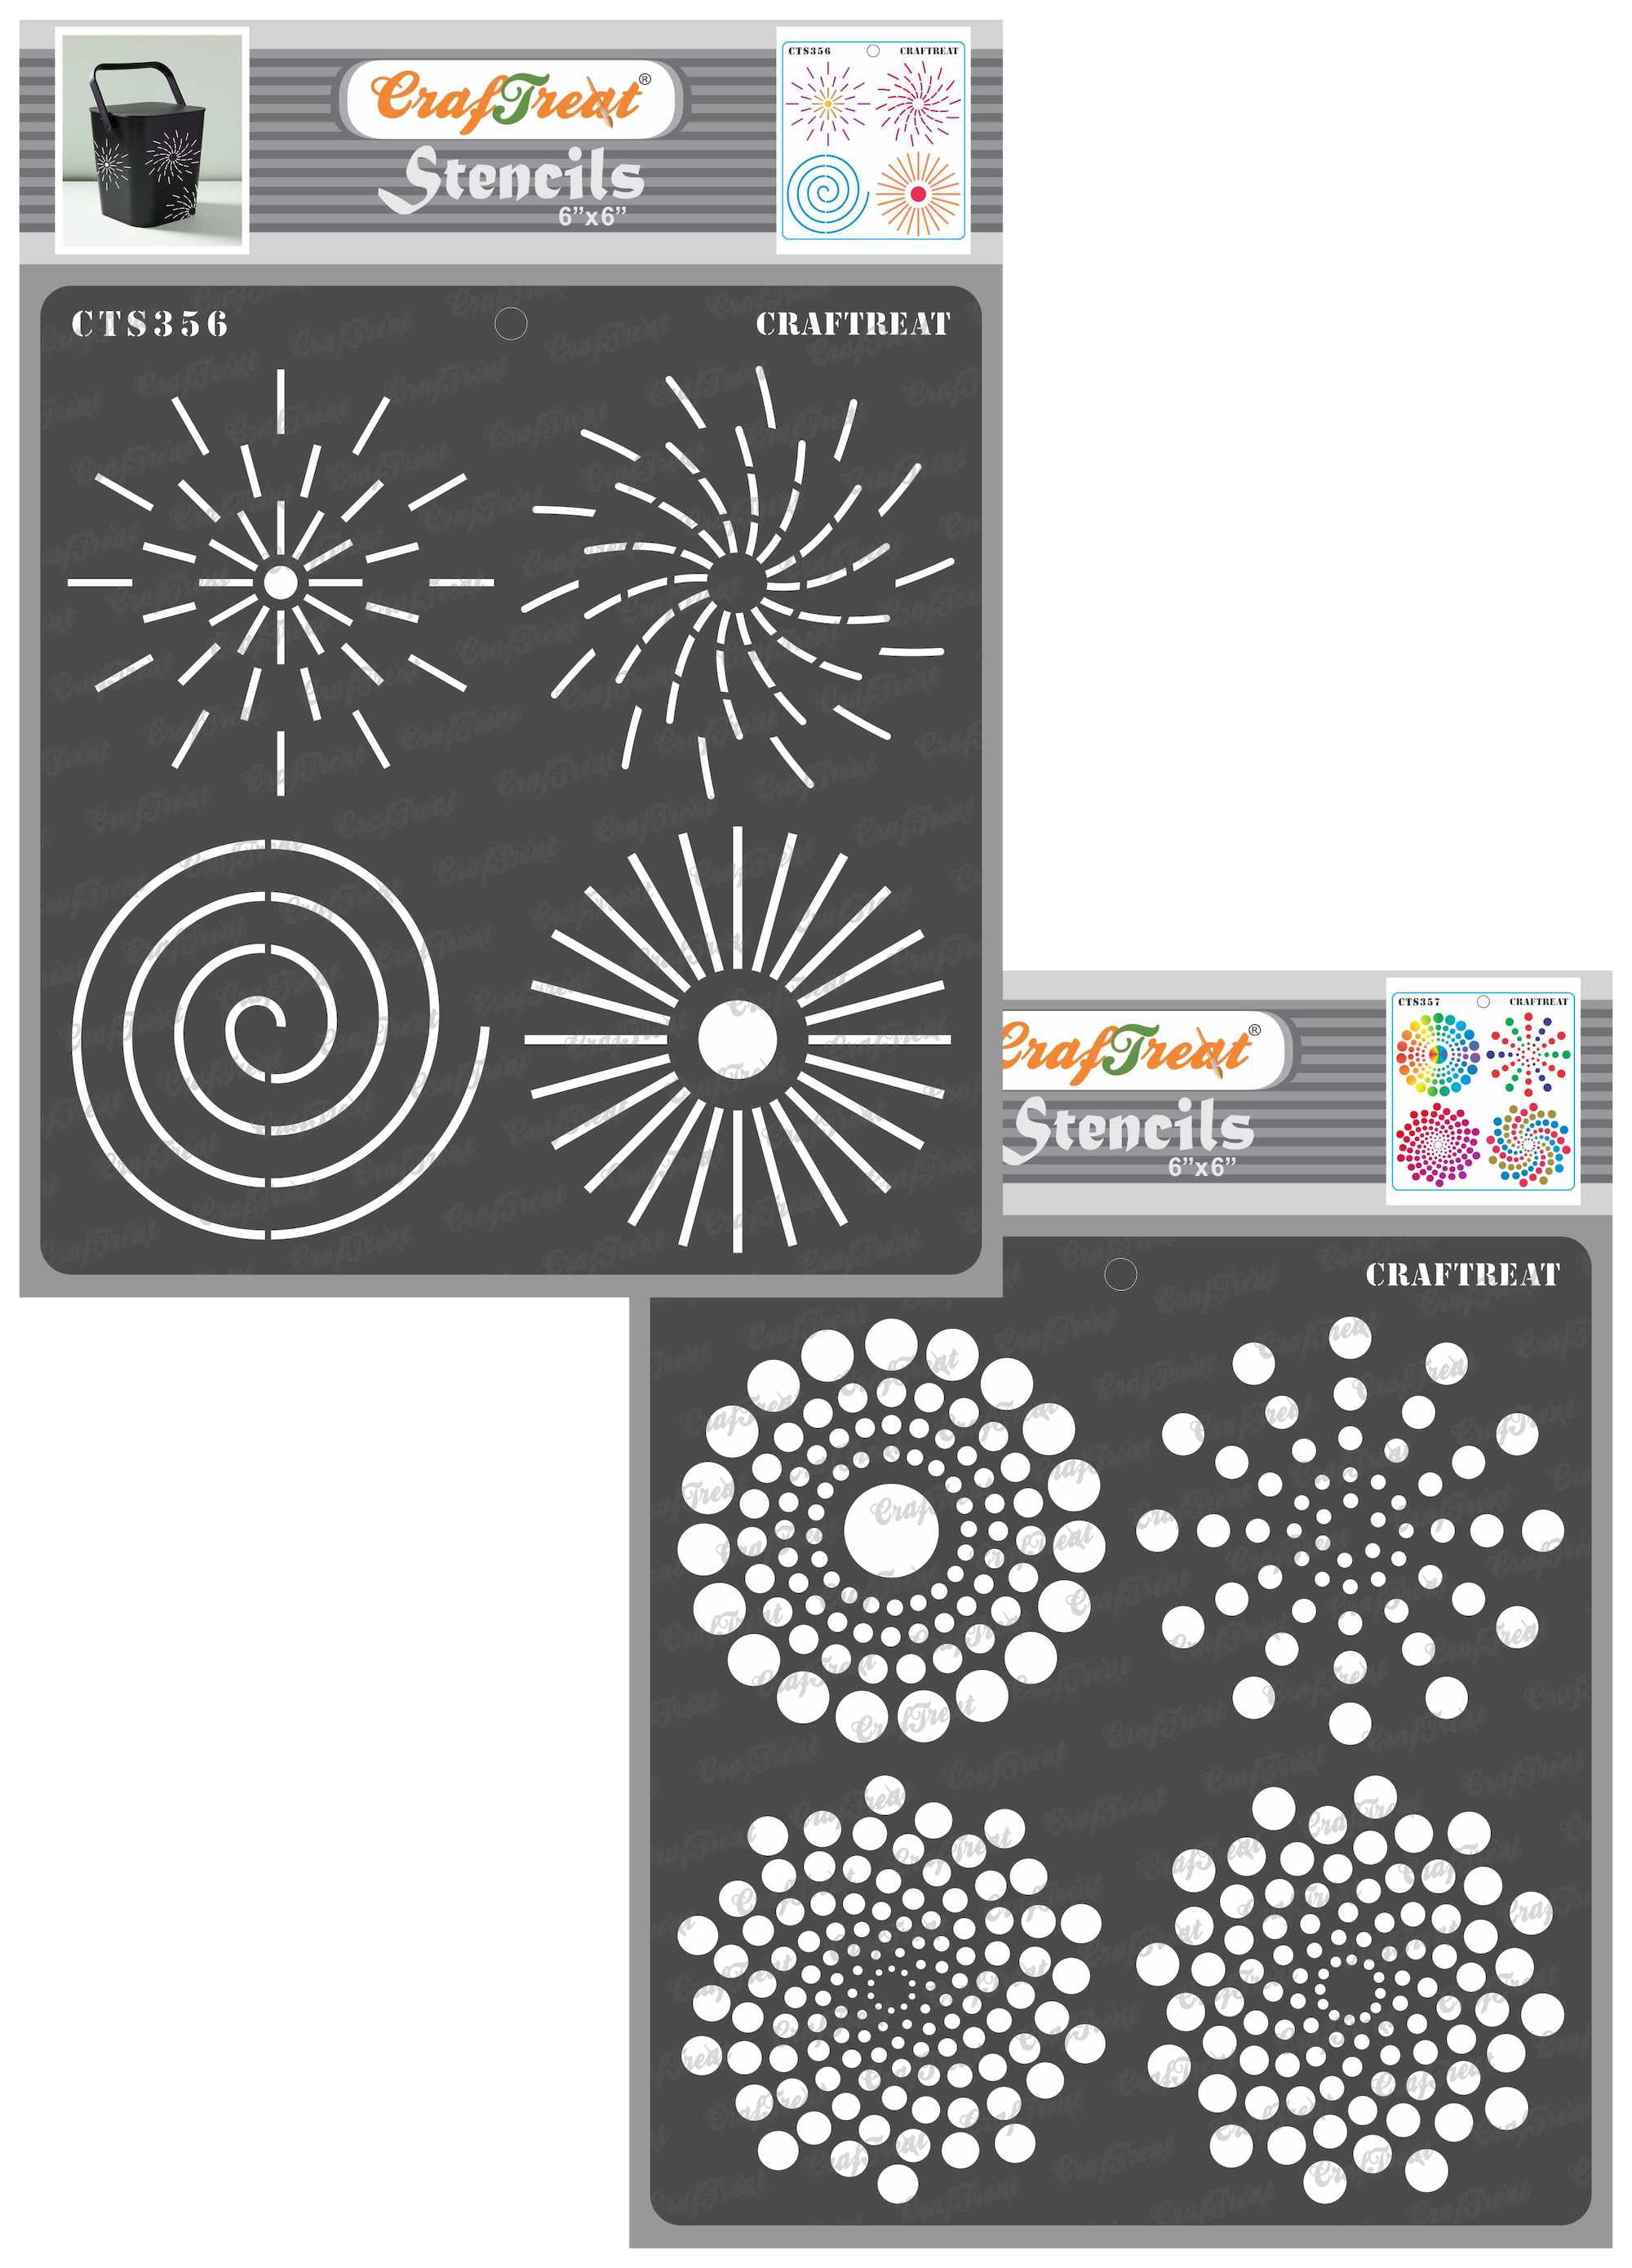 CrafTreat Mandala Stencils for Painting on Wood, Canvas, Paper, Fabric, Floor, Wall and Tile - Mandala 2 - 6x6 Inches - Reusable DIY Art and Craft